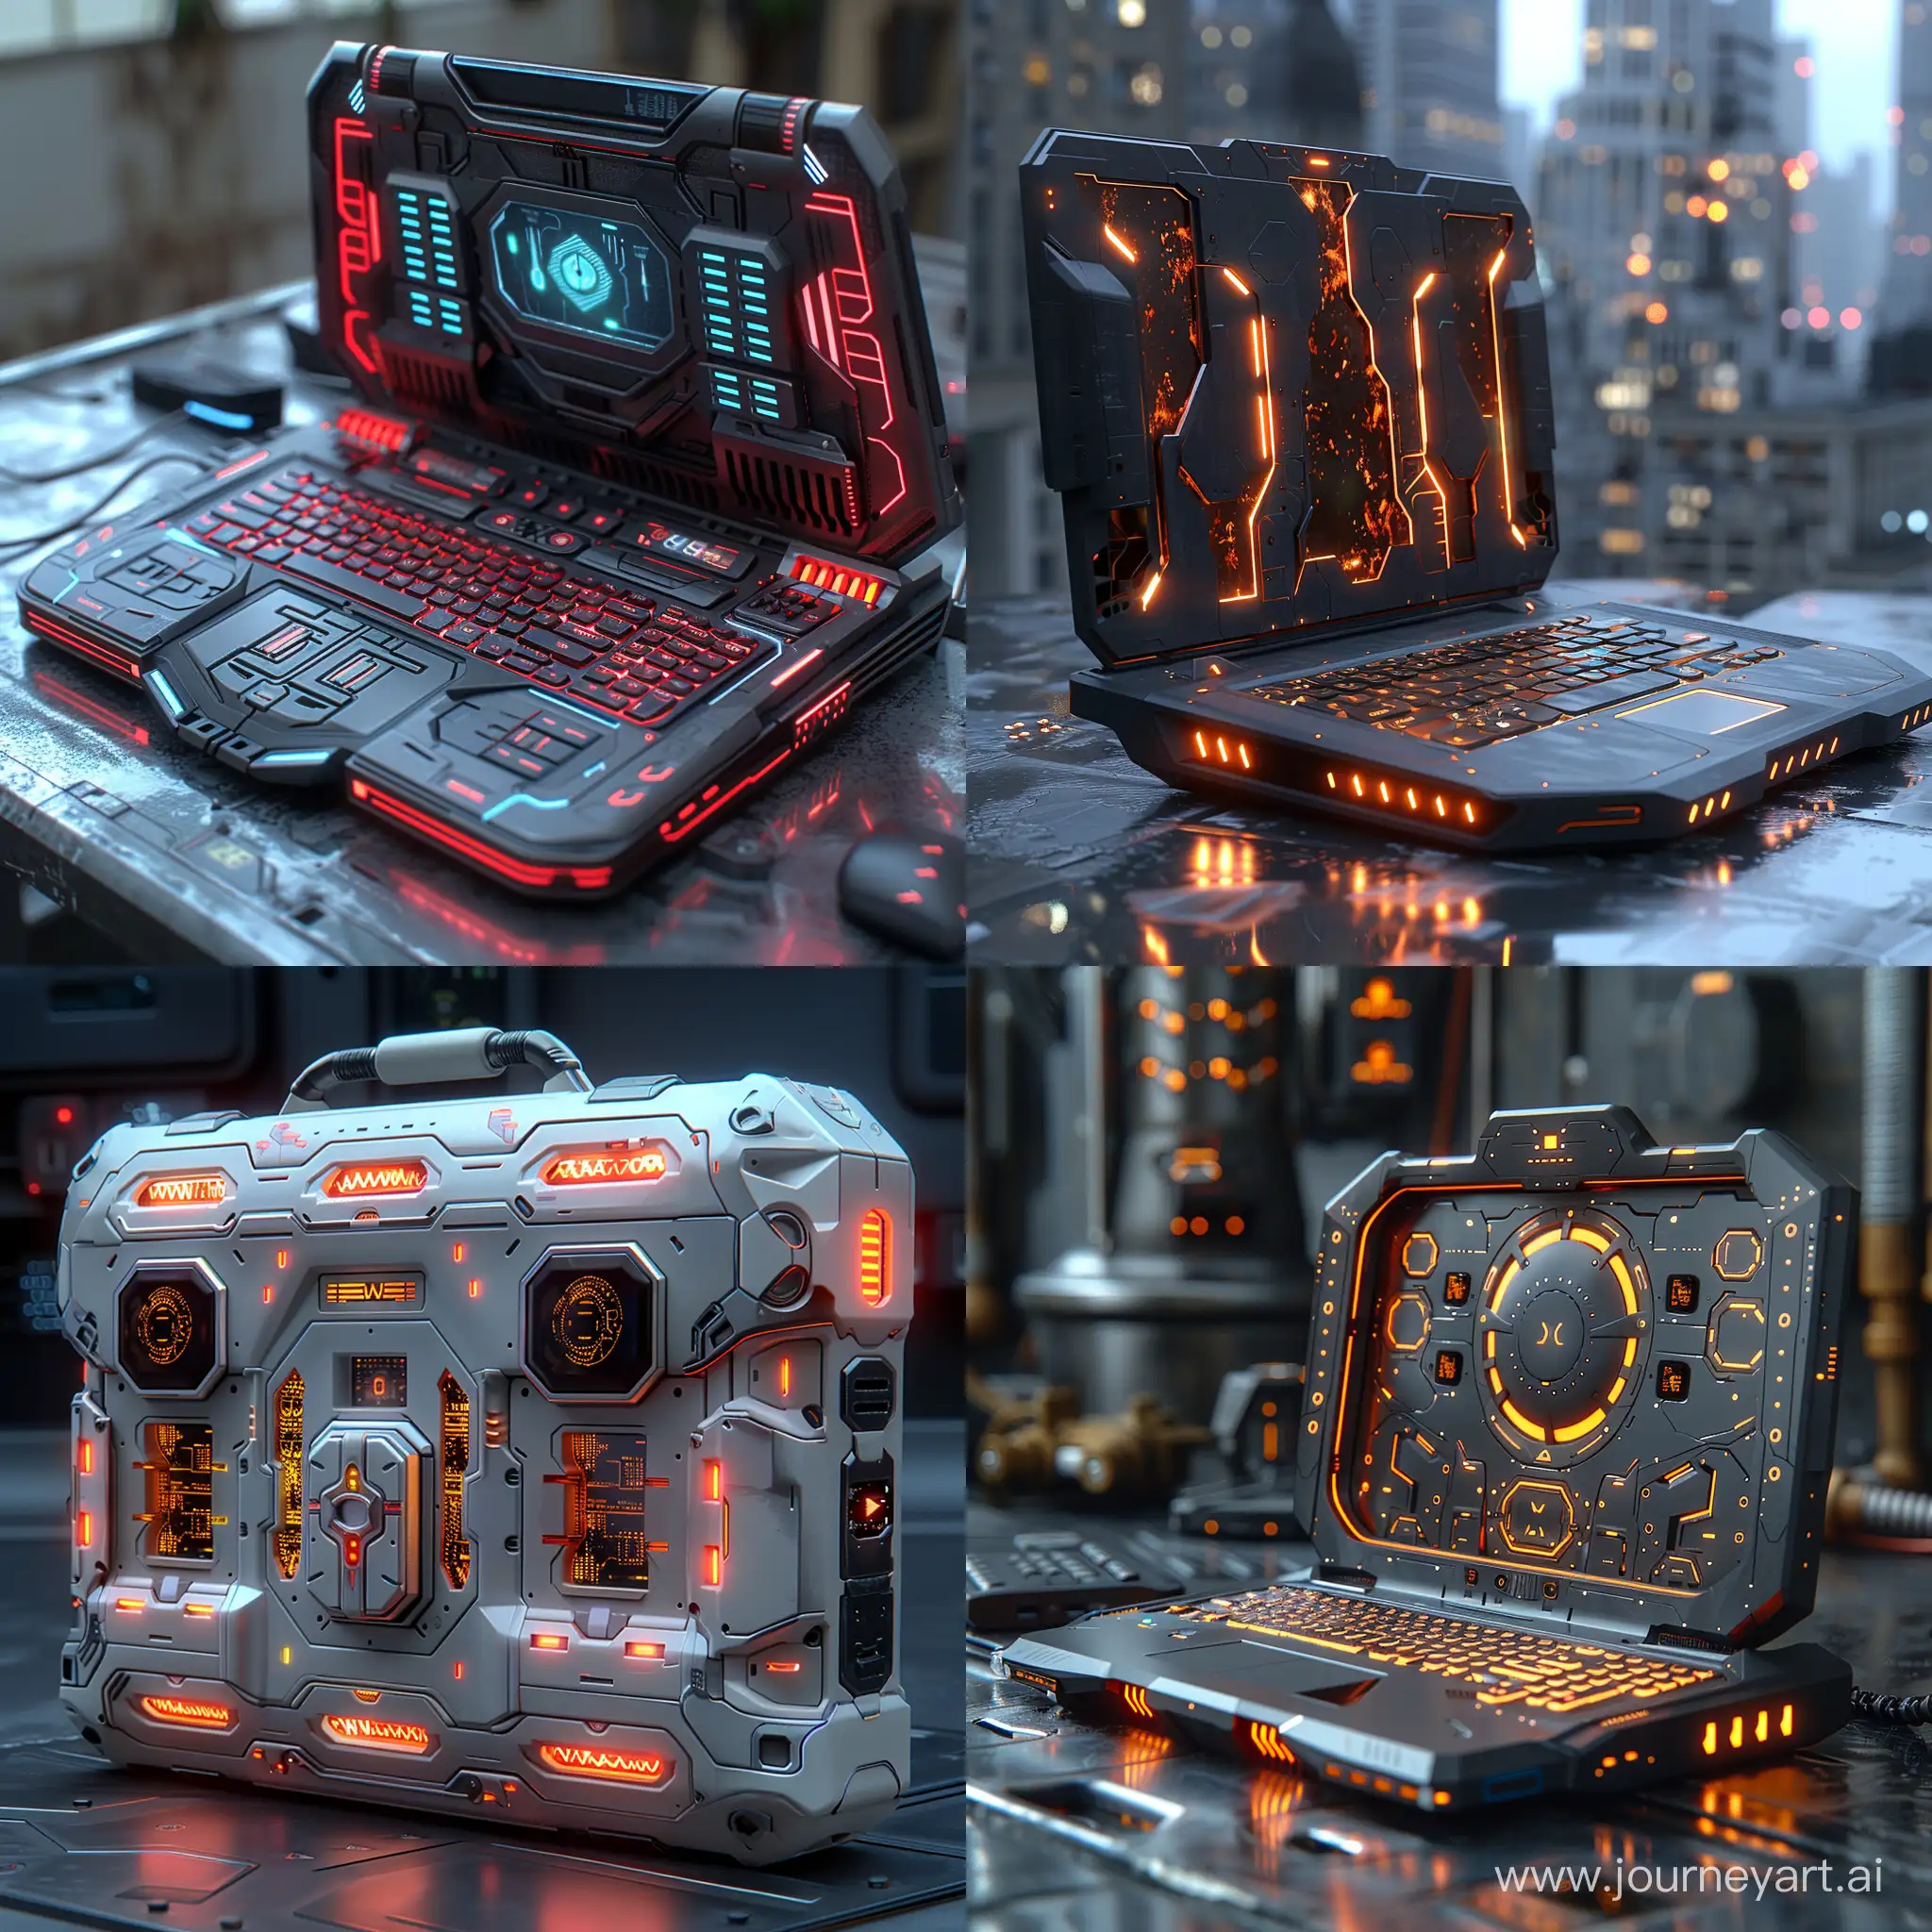 Futuristic-HighTech-Laptop-with-Durable-Lightweight-Materials-and-Octane-Render-Stylization